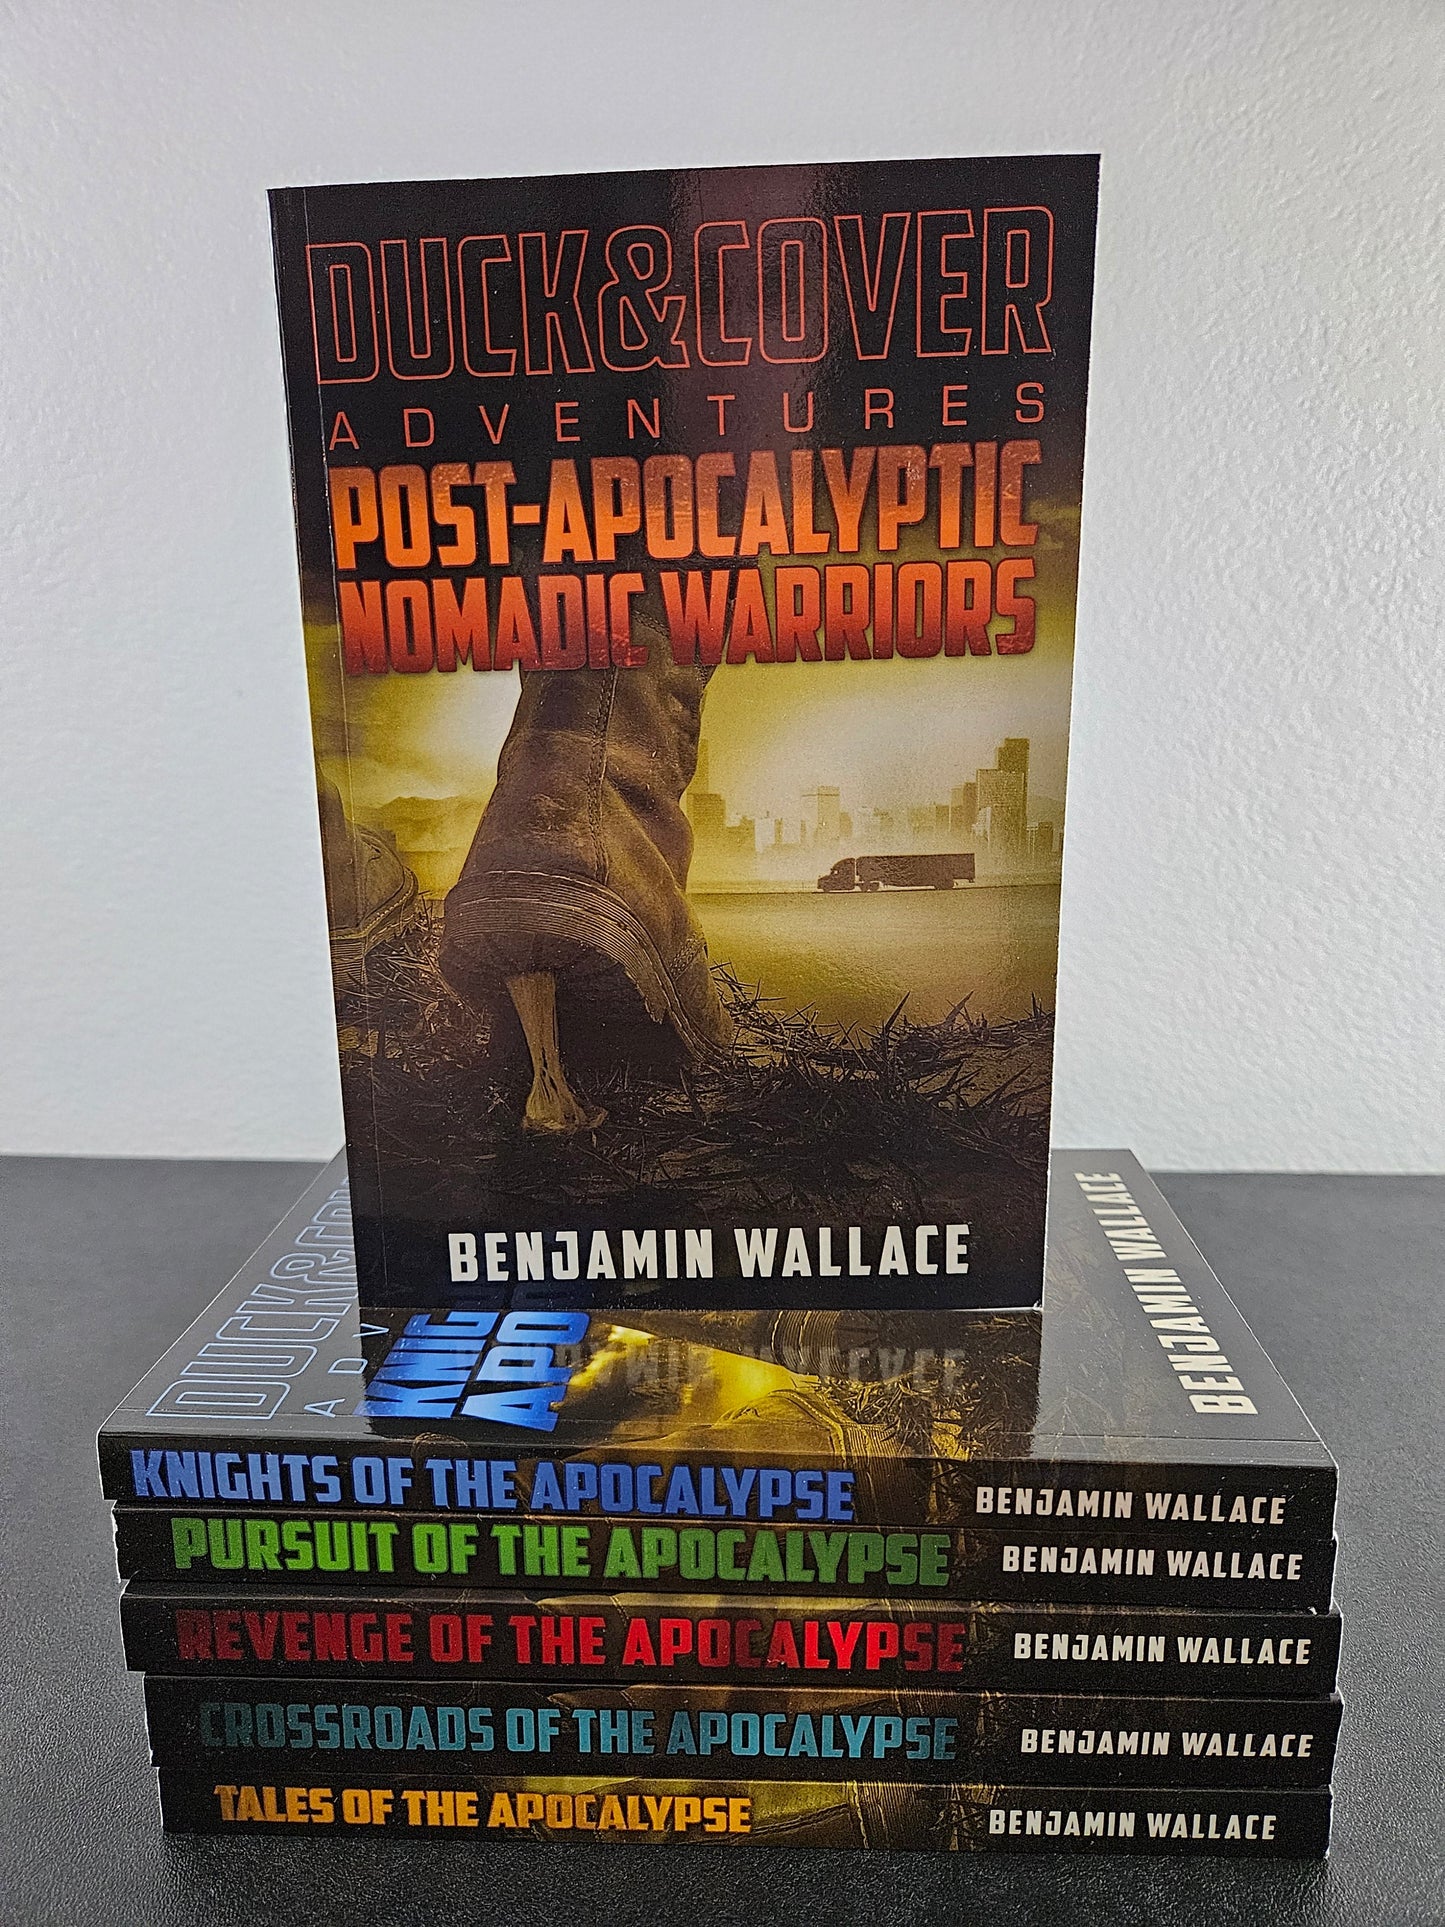 Revenge of the Apocalypse: Duck & Cover Adventures Book 4 (Signed Paperback)